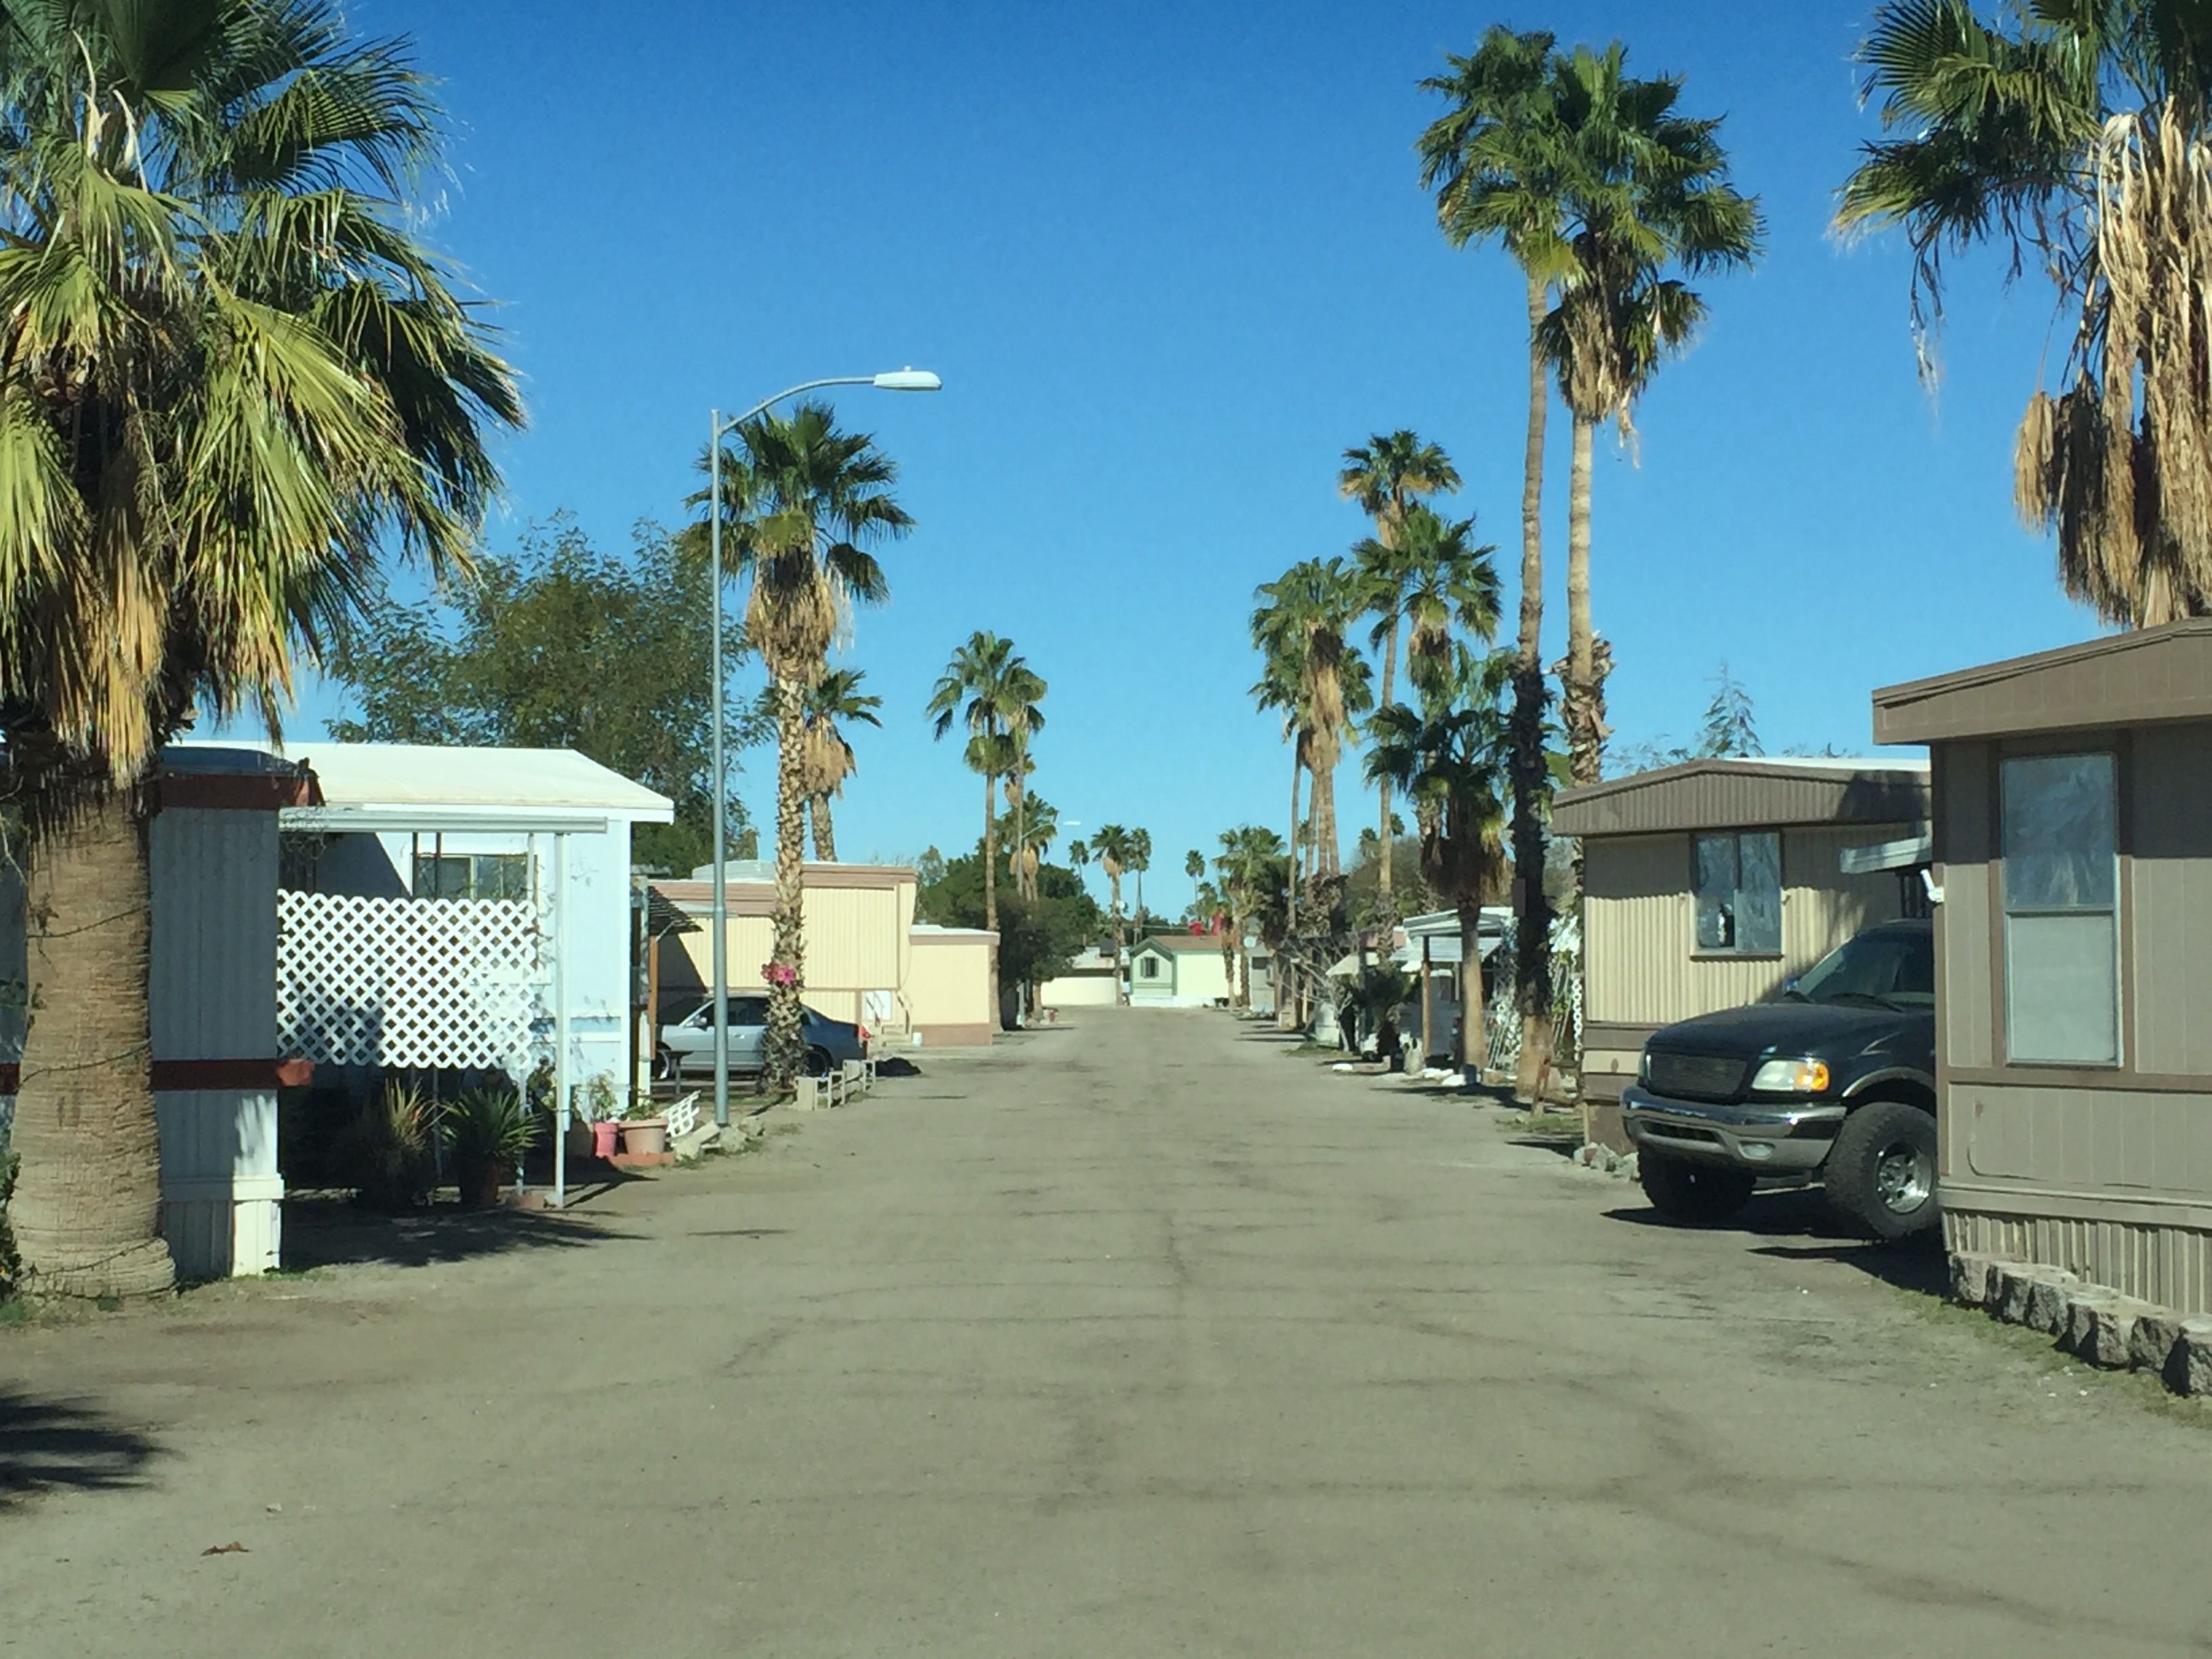 The aging of the mobile home stock and lack of dependable and economical chattel financing has resulted in the inability of many mobile home owners to replace older, substandard homes in rental parks.